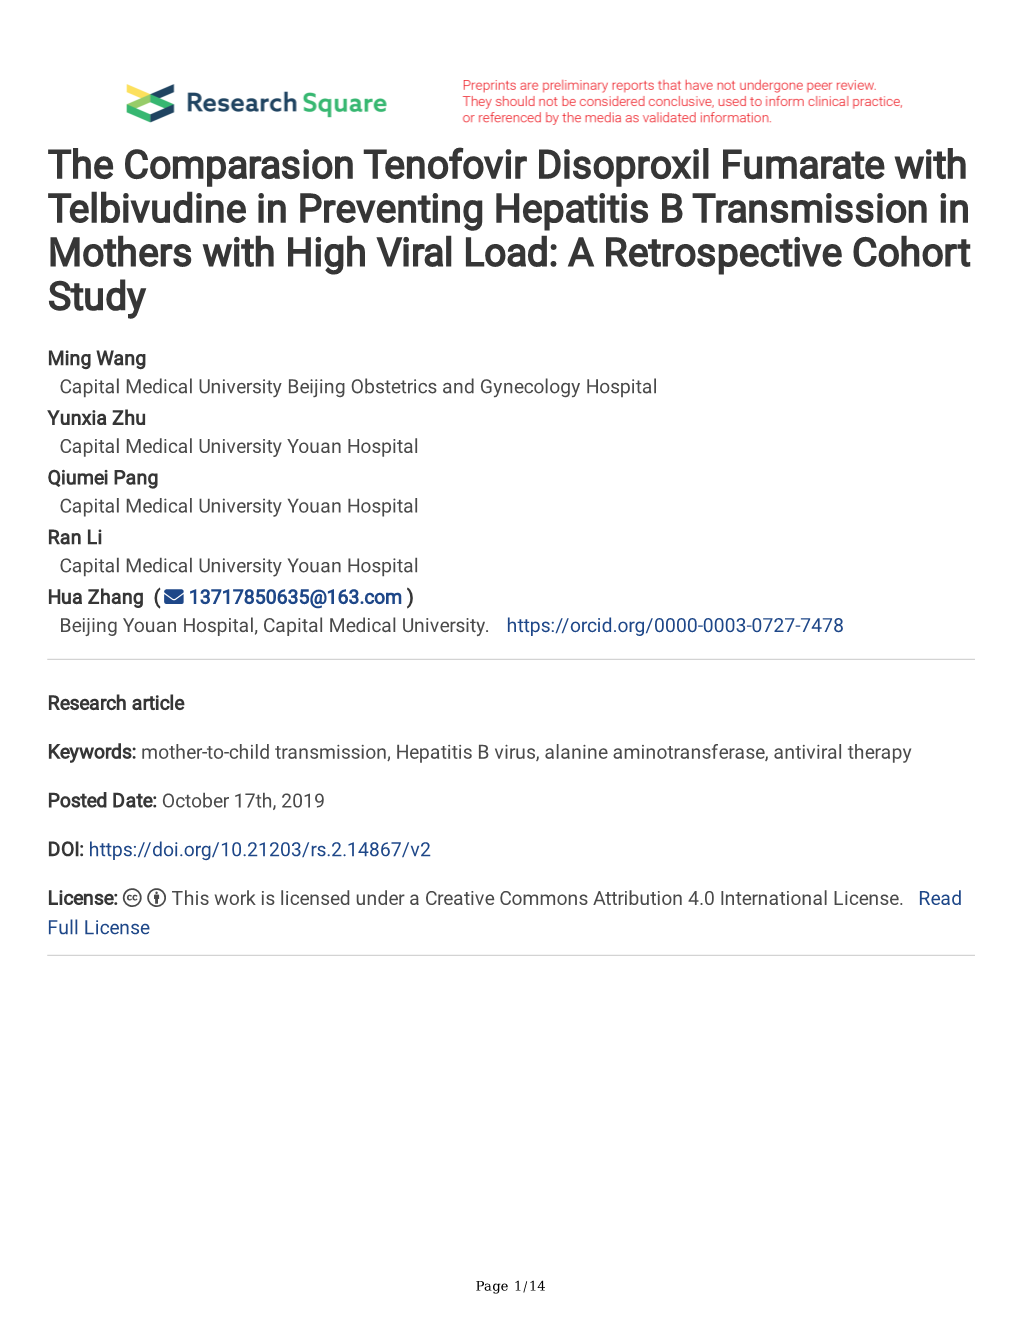 The Comparasion Tenofovir Disoproxil Fumarate with Telbivudine in Preventing Hepatitis B Transmission in Mothers with High Viral Load: a Retrospective Cohort Study